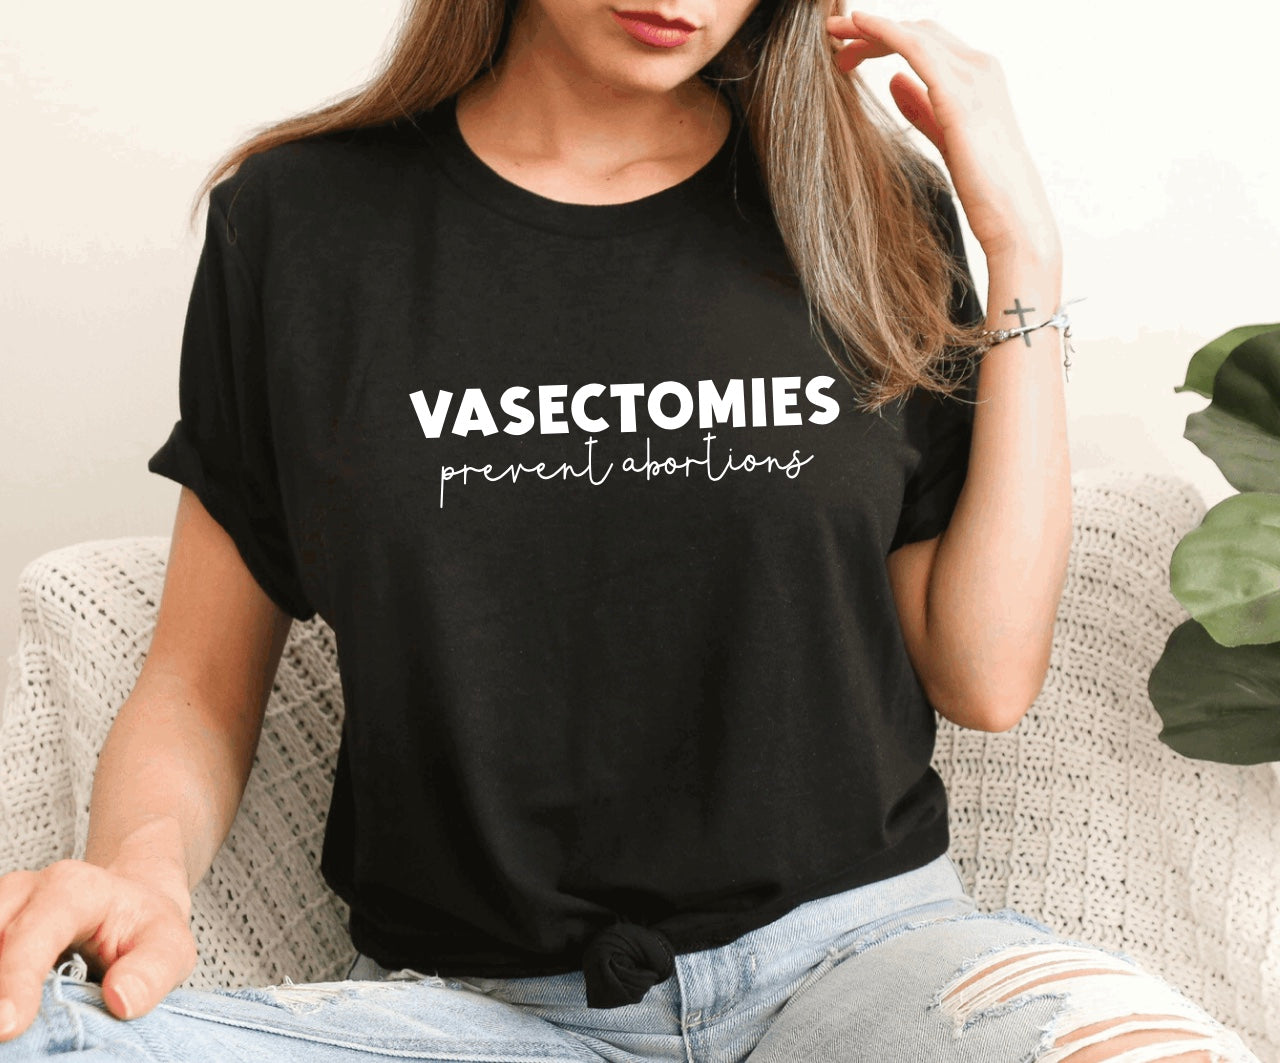 Vasectomies prevent abortions t-shirt 